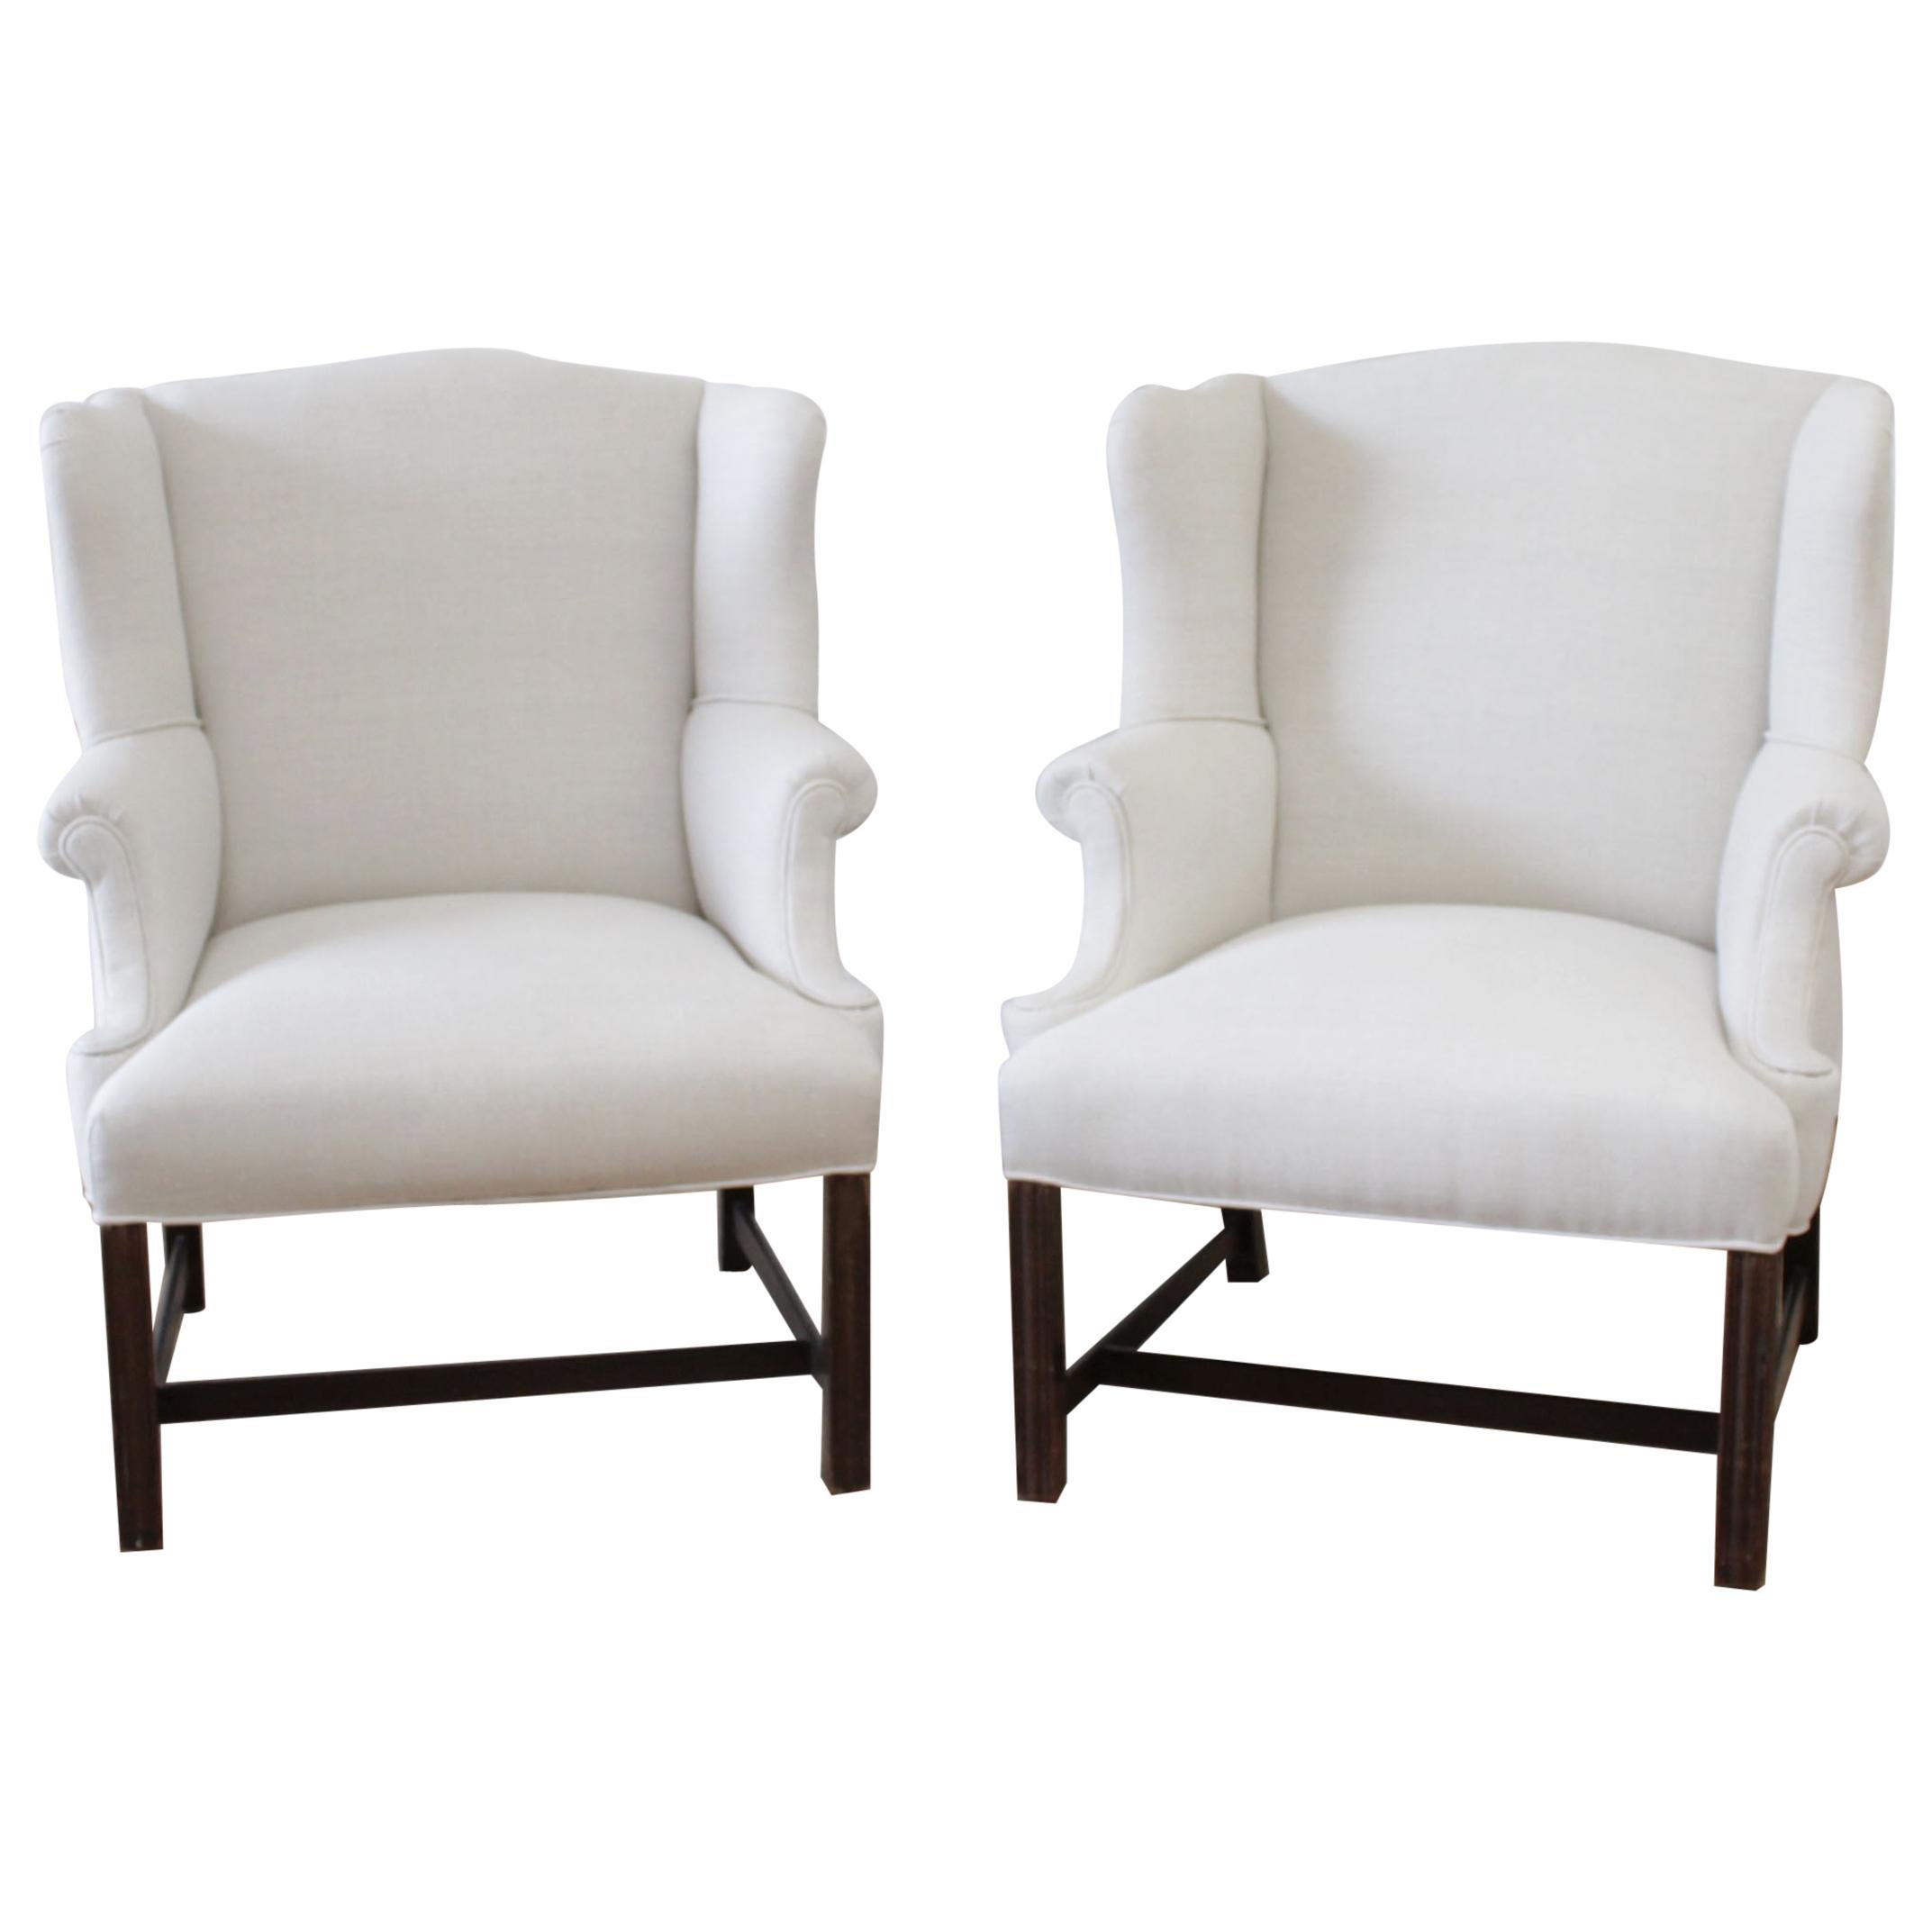 Pair of Vintage Wing Chairs in Natural Linen